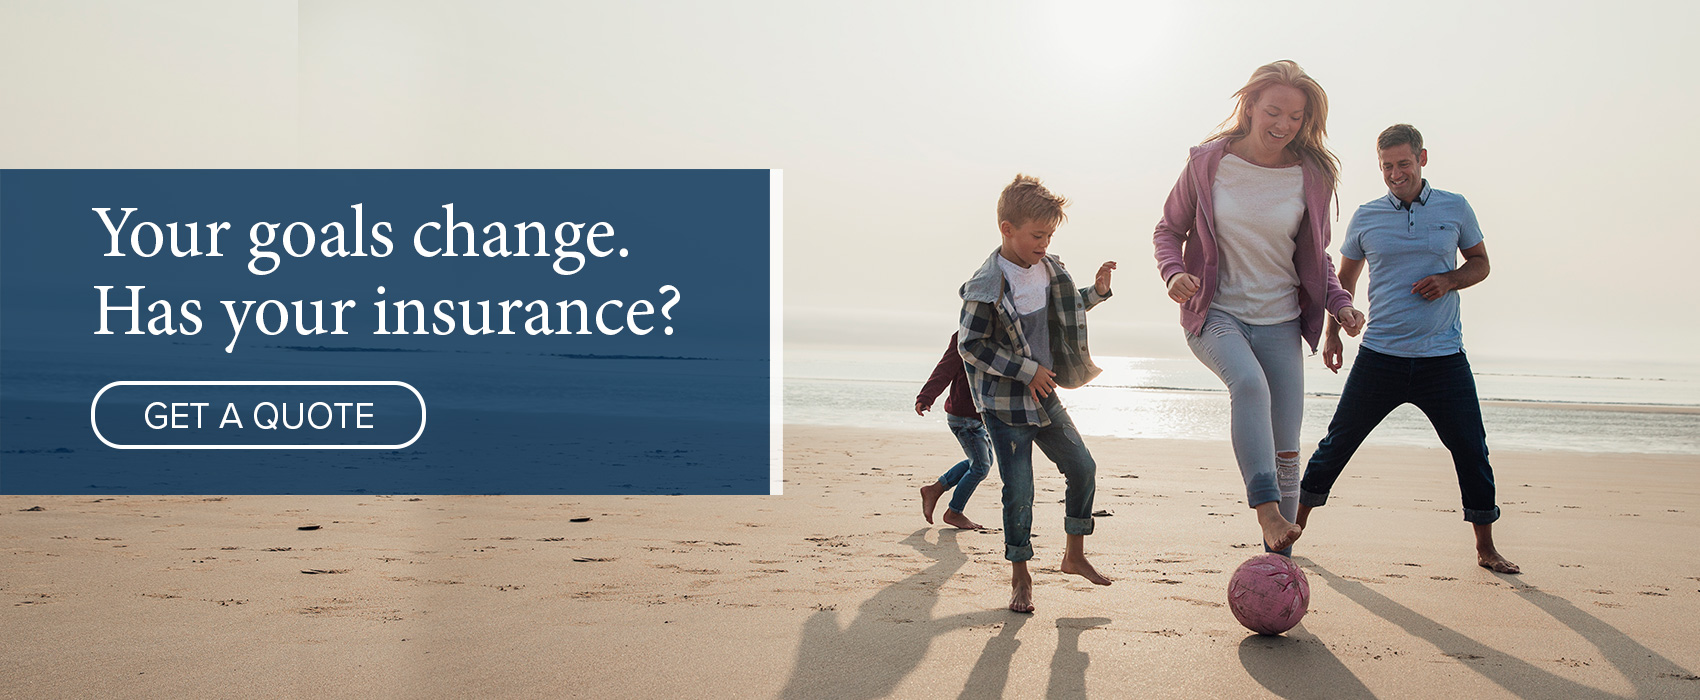 Your goals change - Has your insurance